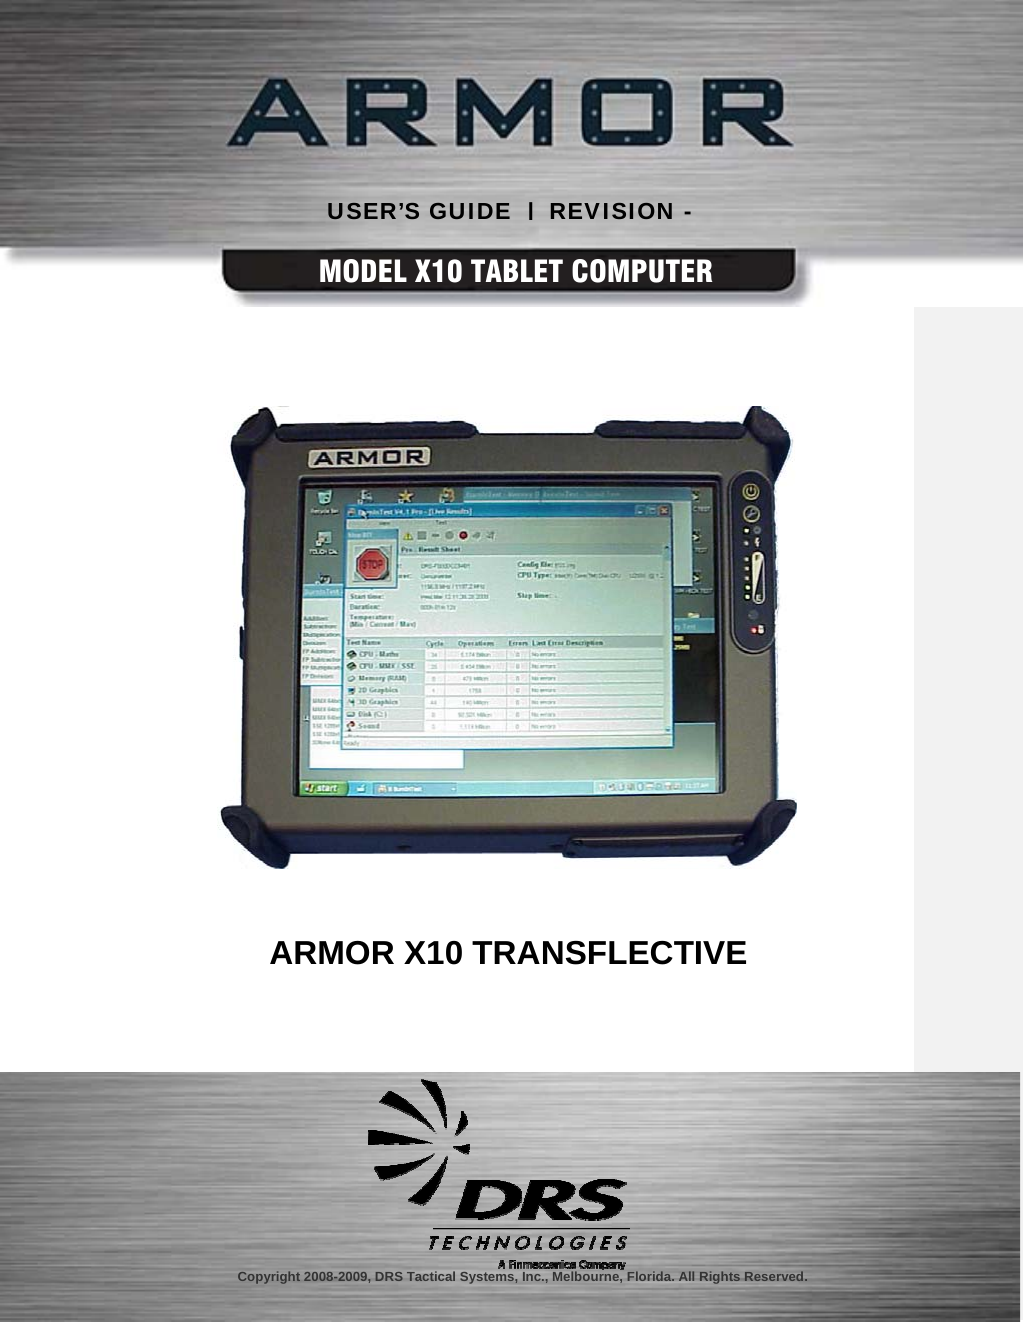                                      Copyright 2008-2009, DRS Tactical Systems, Inc., Melbourne, Florida. All Rights Reserved. MODEL X10 TABLET COMPUTER USER’S GUIDE  |  REVISION - ARMOR X10 TRANSFLECTIVE 